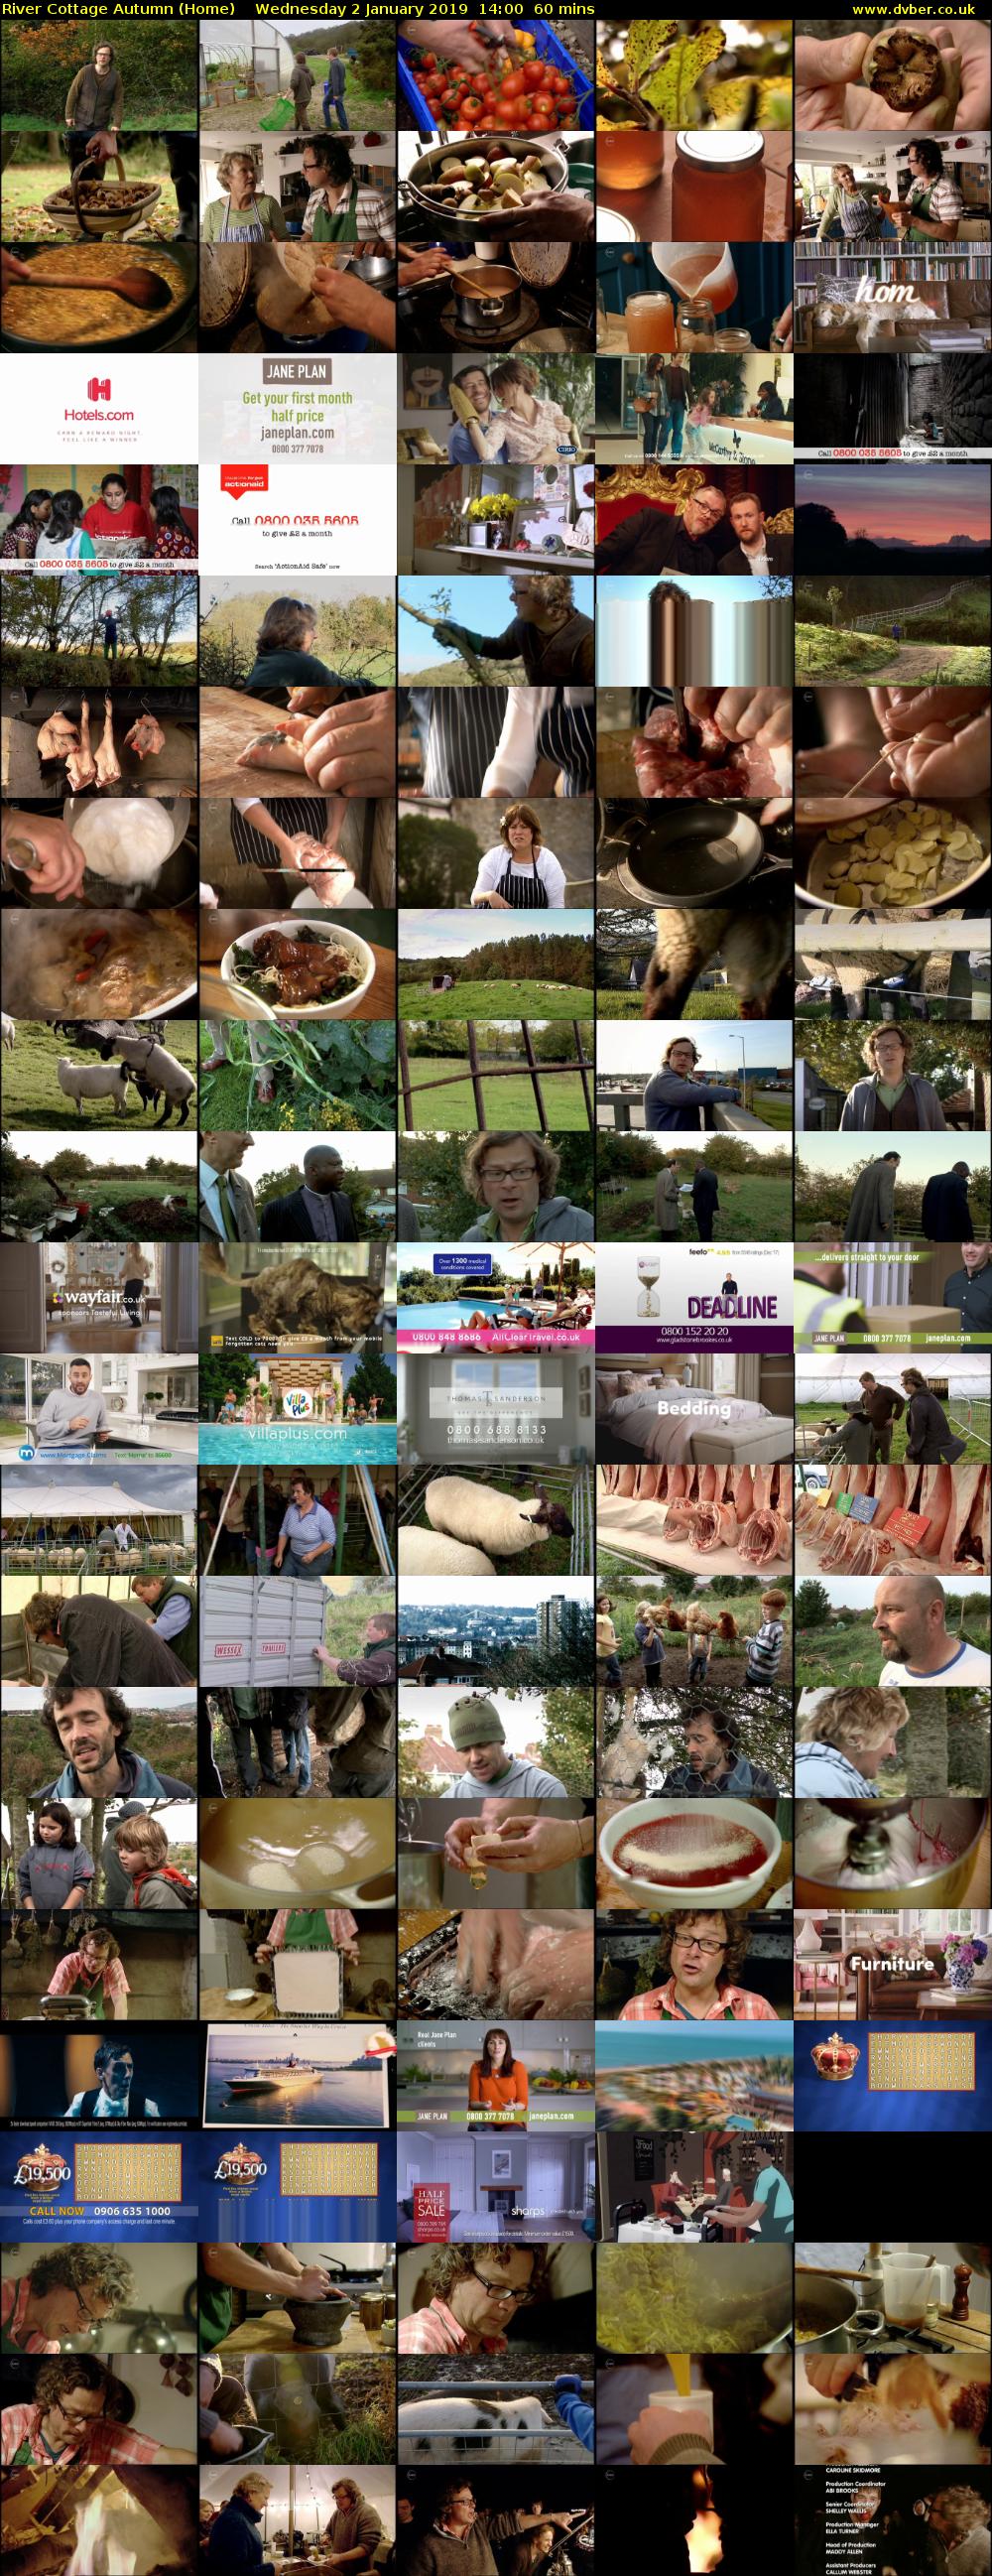 River Cottage Autumn (Home) Wednesday 2 January 2019 14:00 - 15:00